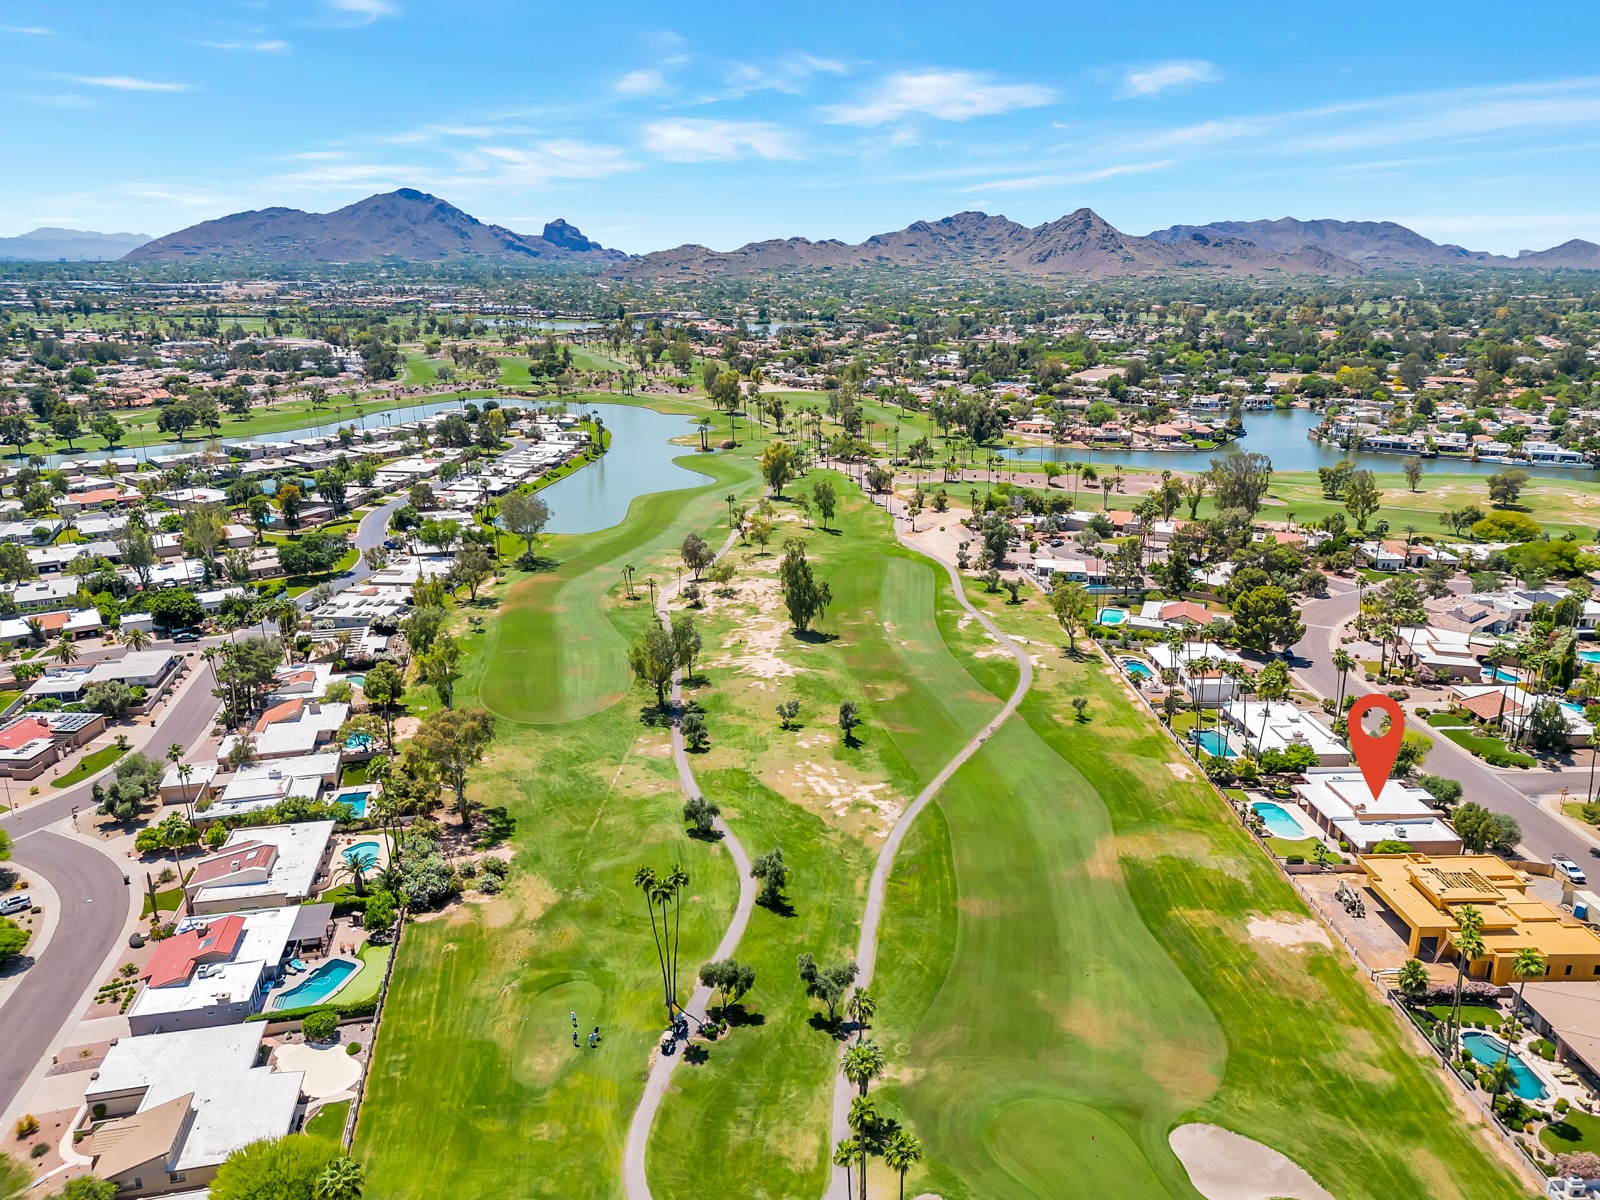 An aerial view of a golf course in Scottsdale, Arizona with a golf course lot in McCormick Ranch.